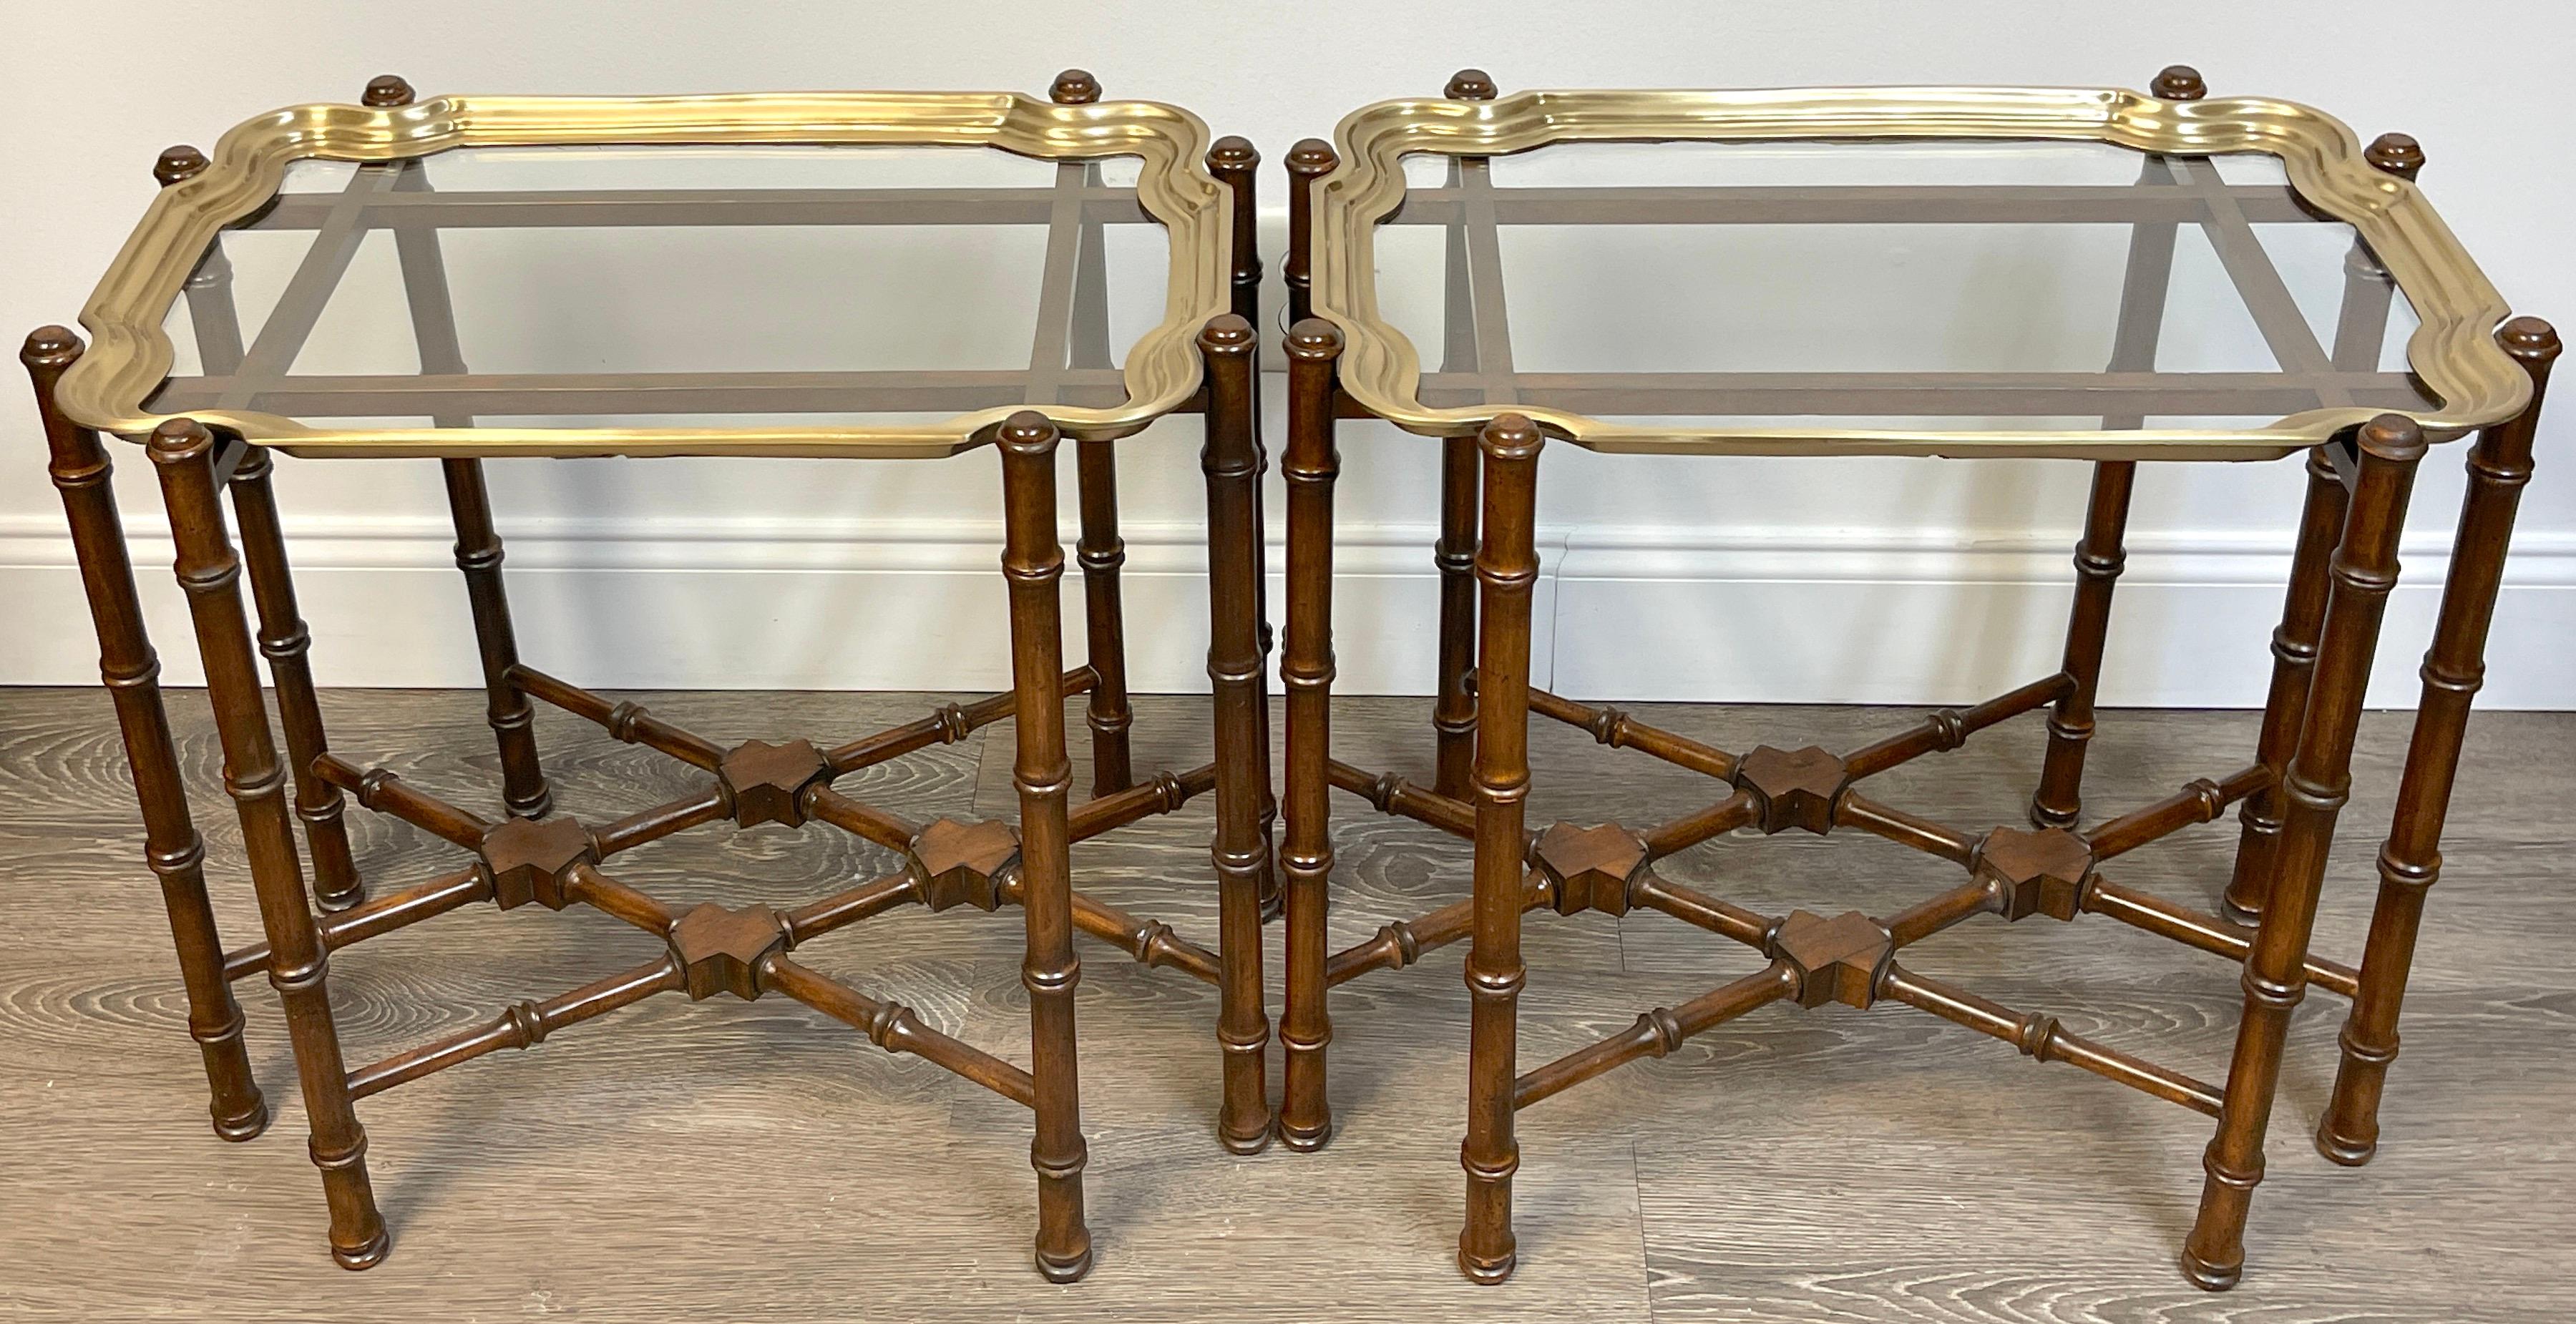 Pair of brass & mahogany Campaign style coffee tables or end tables.
Unmarked, Attributed to the Baker Furniture company 
Rare to find a pair, often used together as coffee tables, or can be used as end or side tables. 

Each one with a